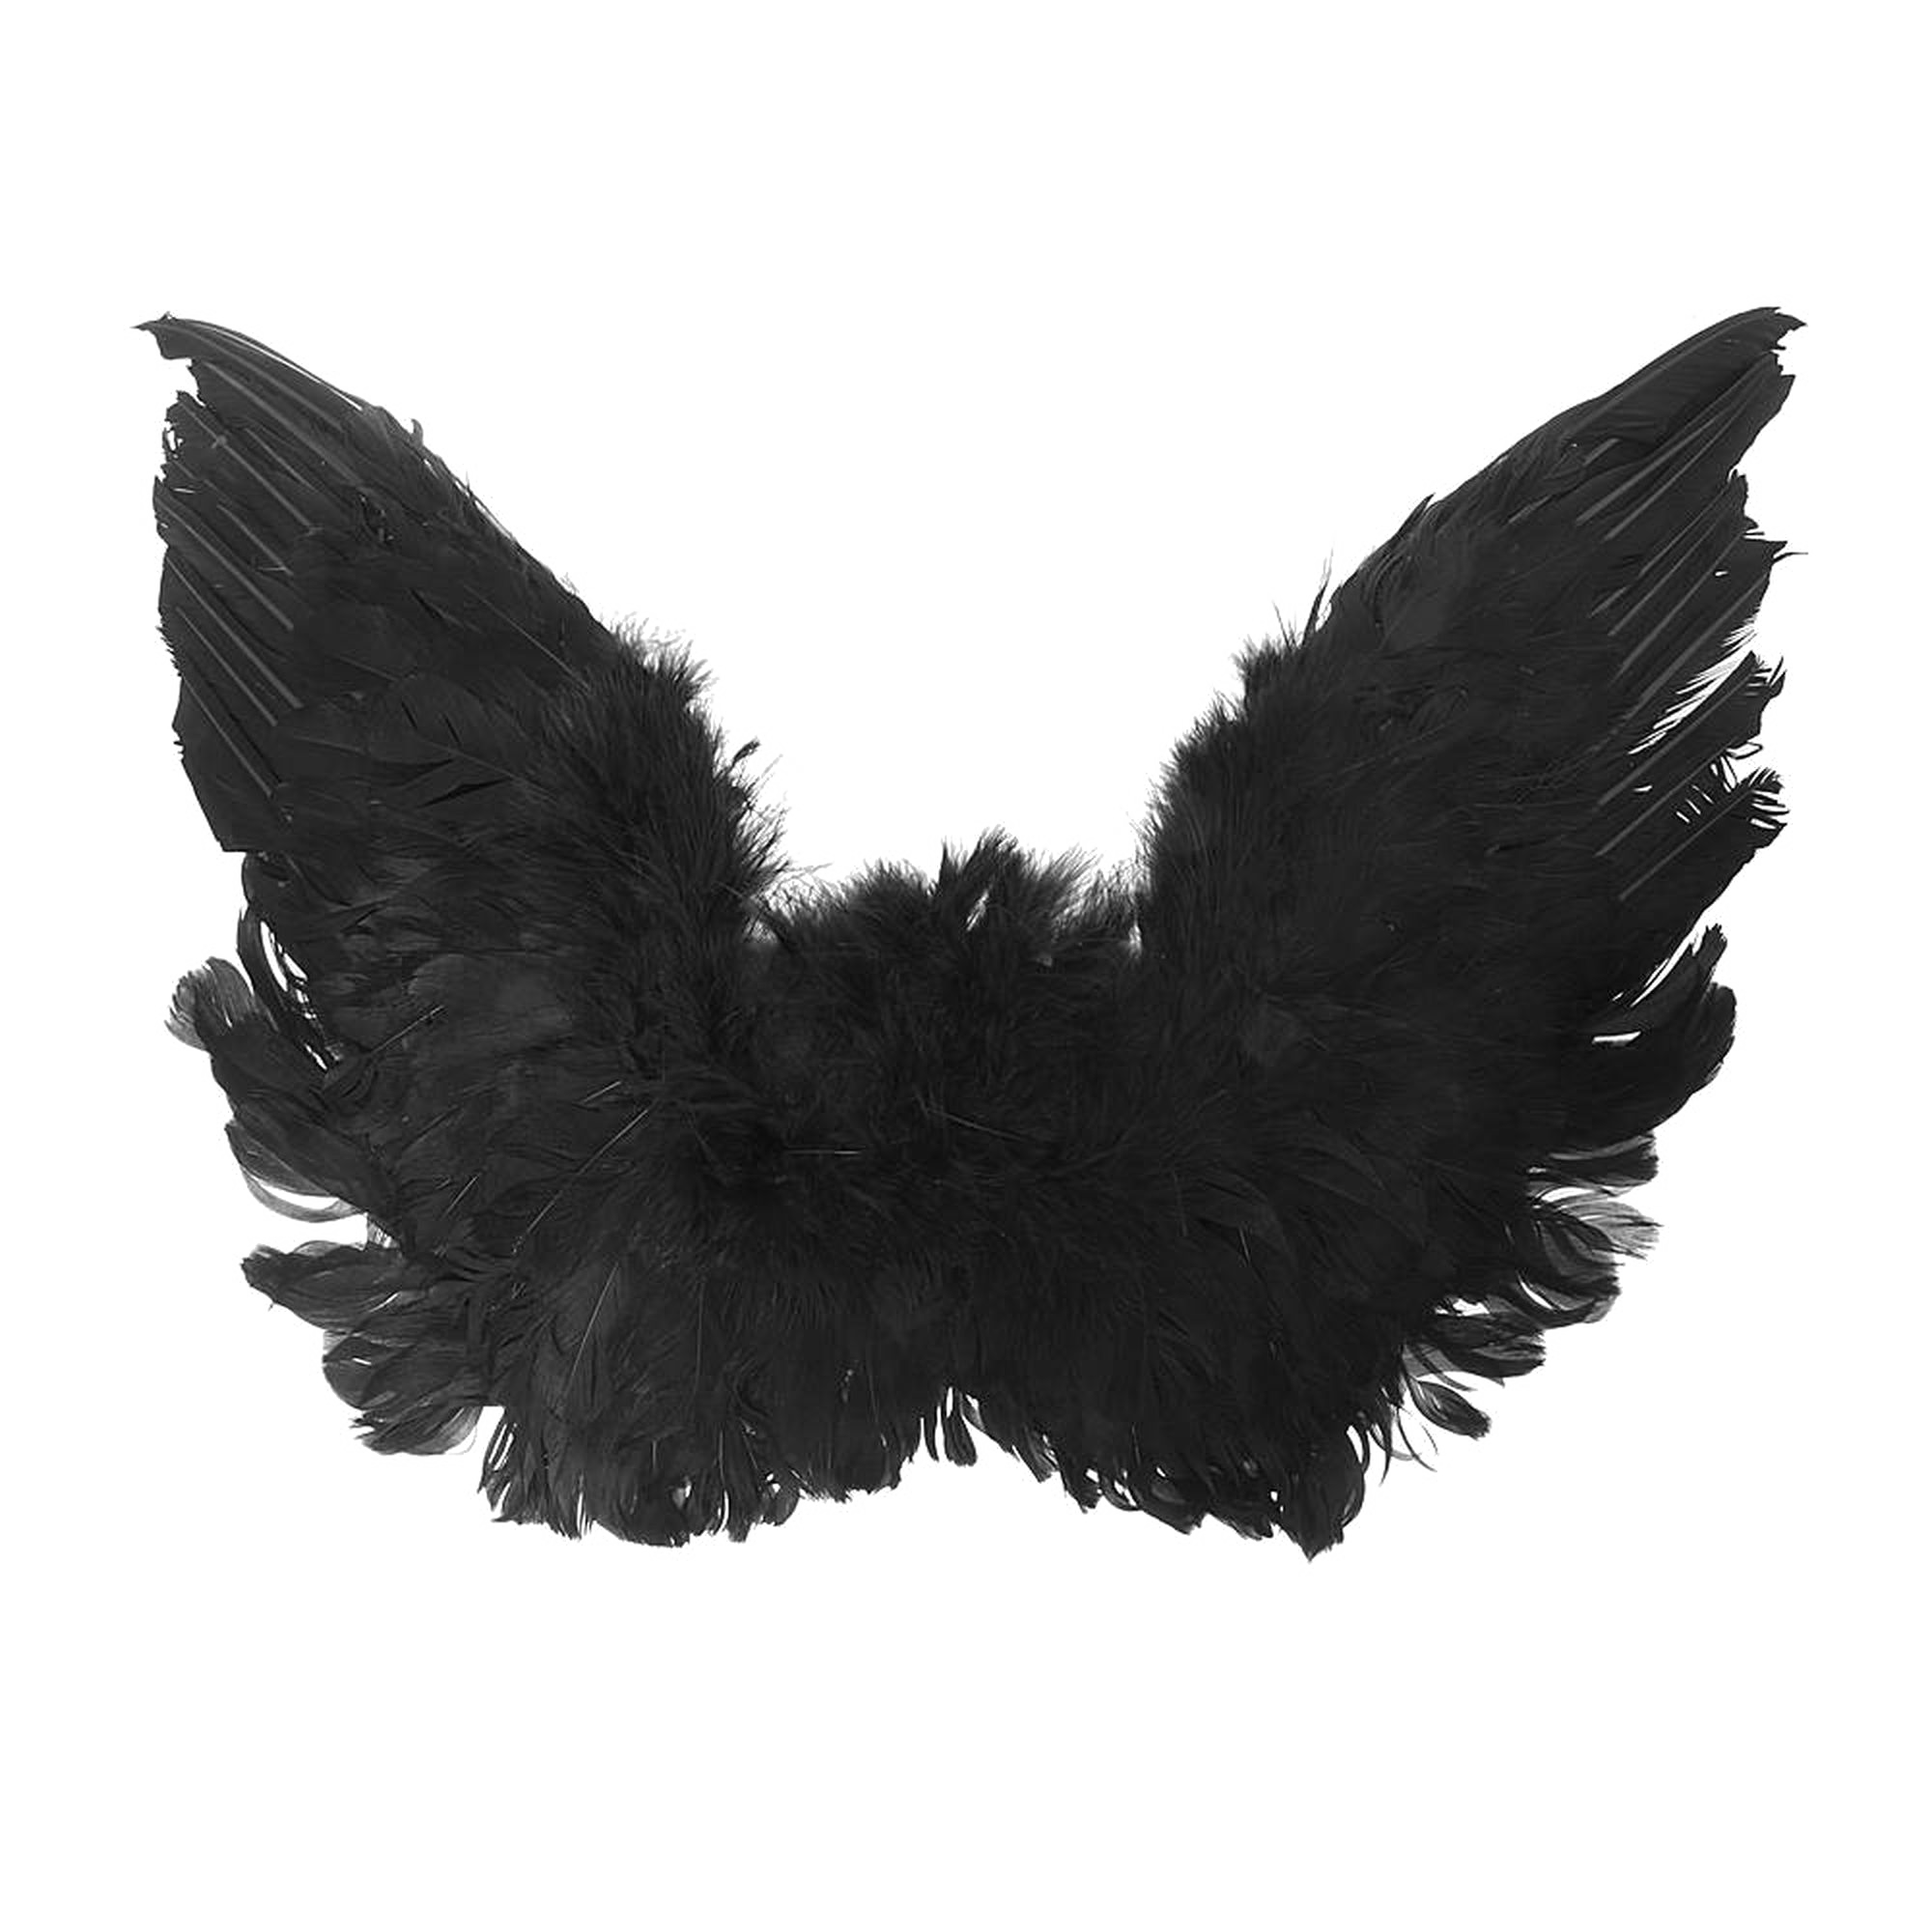 Black Angel Wings PNG High-Quality Image